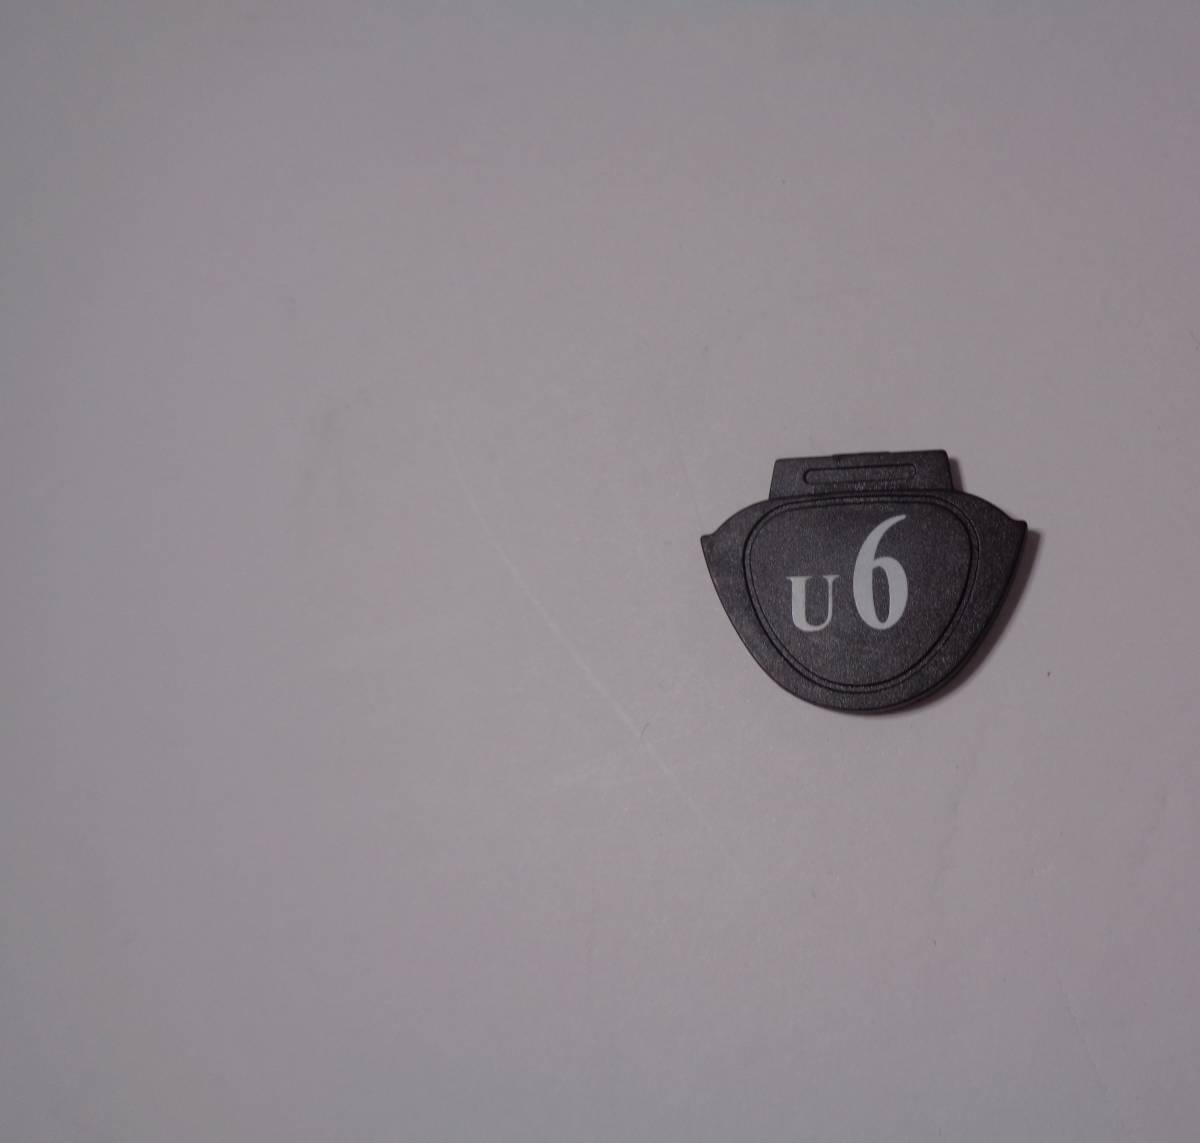  new product number hand tag Maruman Maruman utility hybrid U6 electric outlet type 